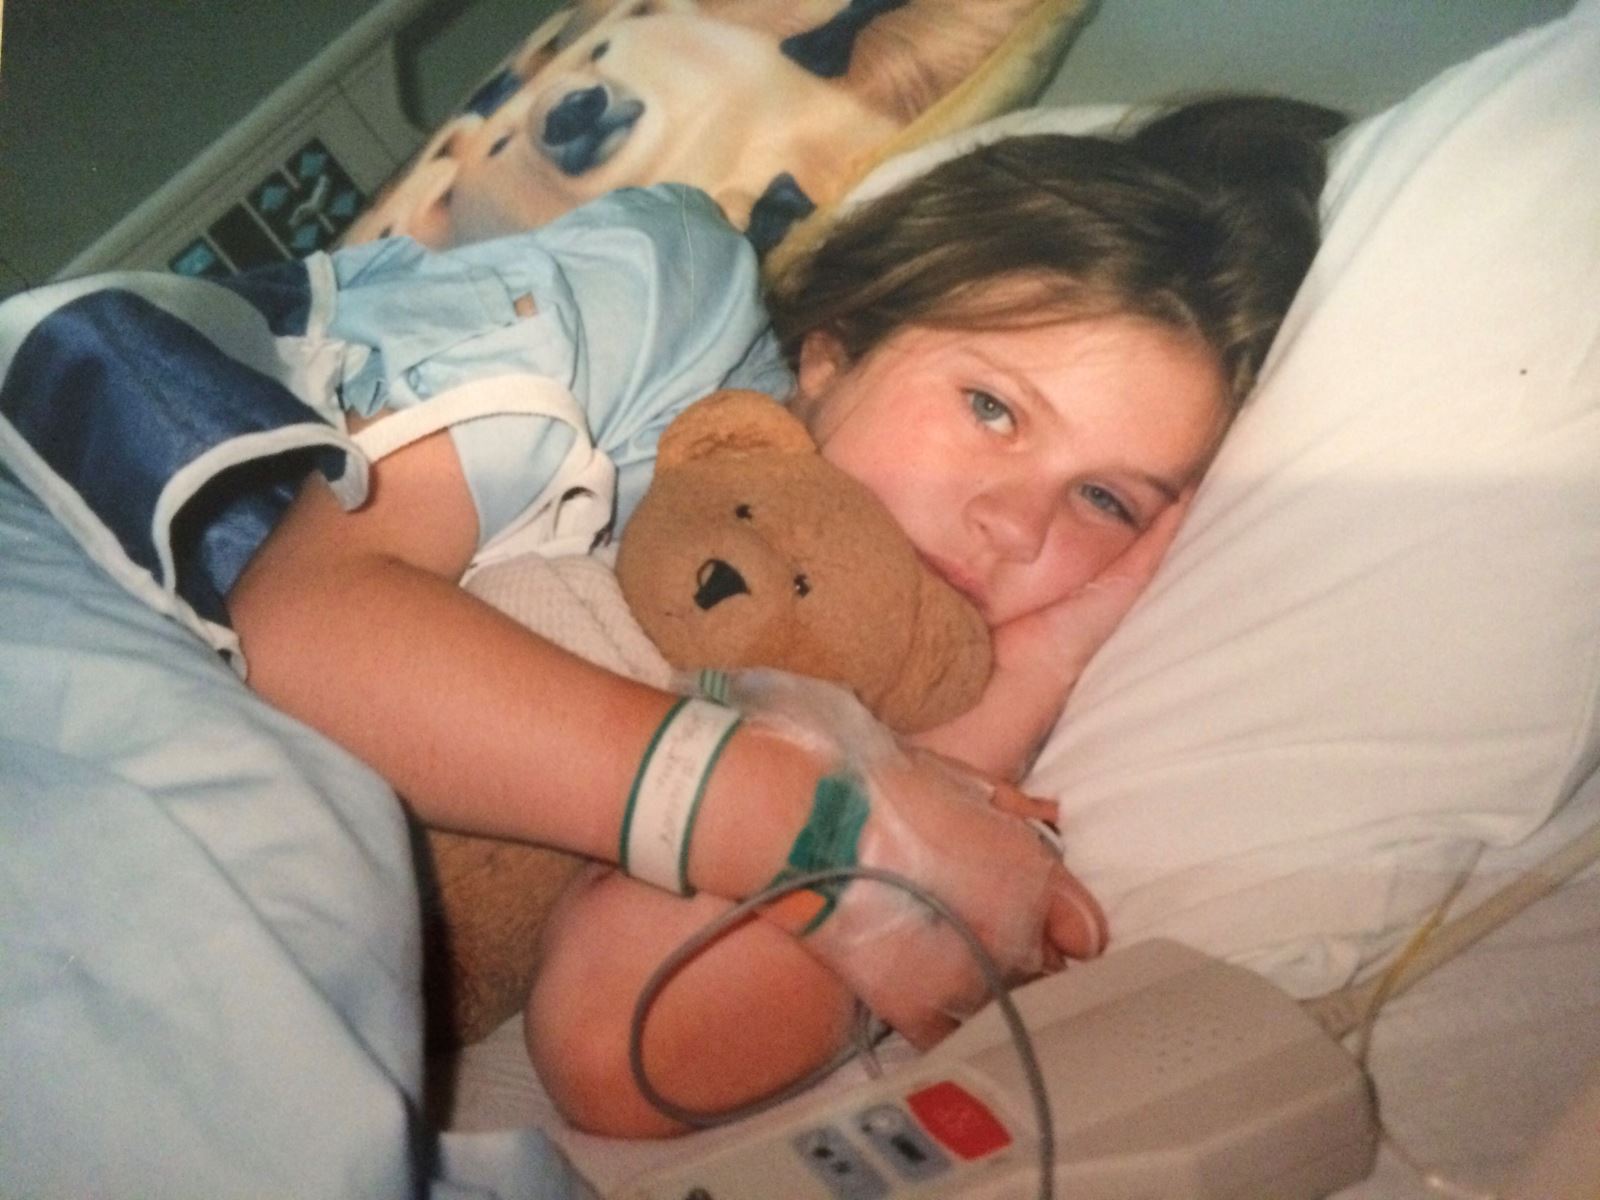 CHoR patient Jenna Jacoby in her hospital bed at 8 years old